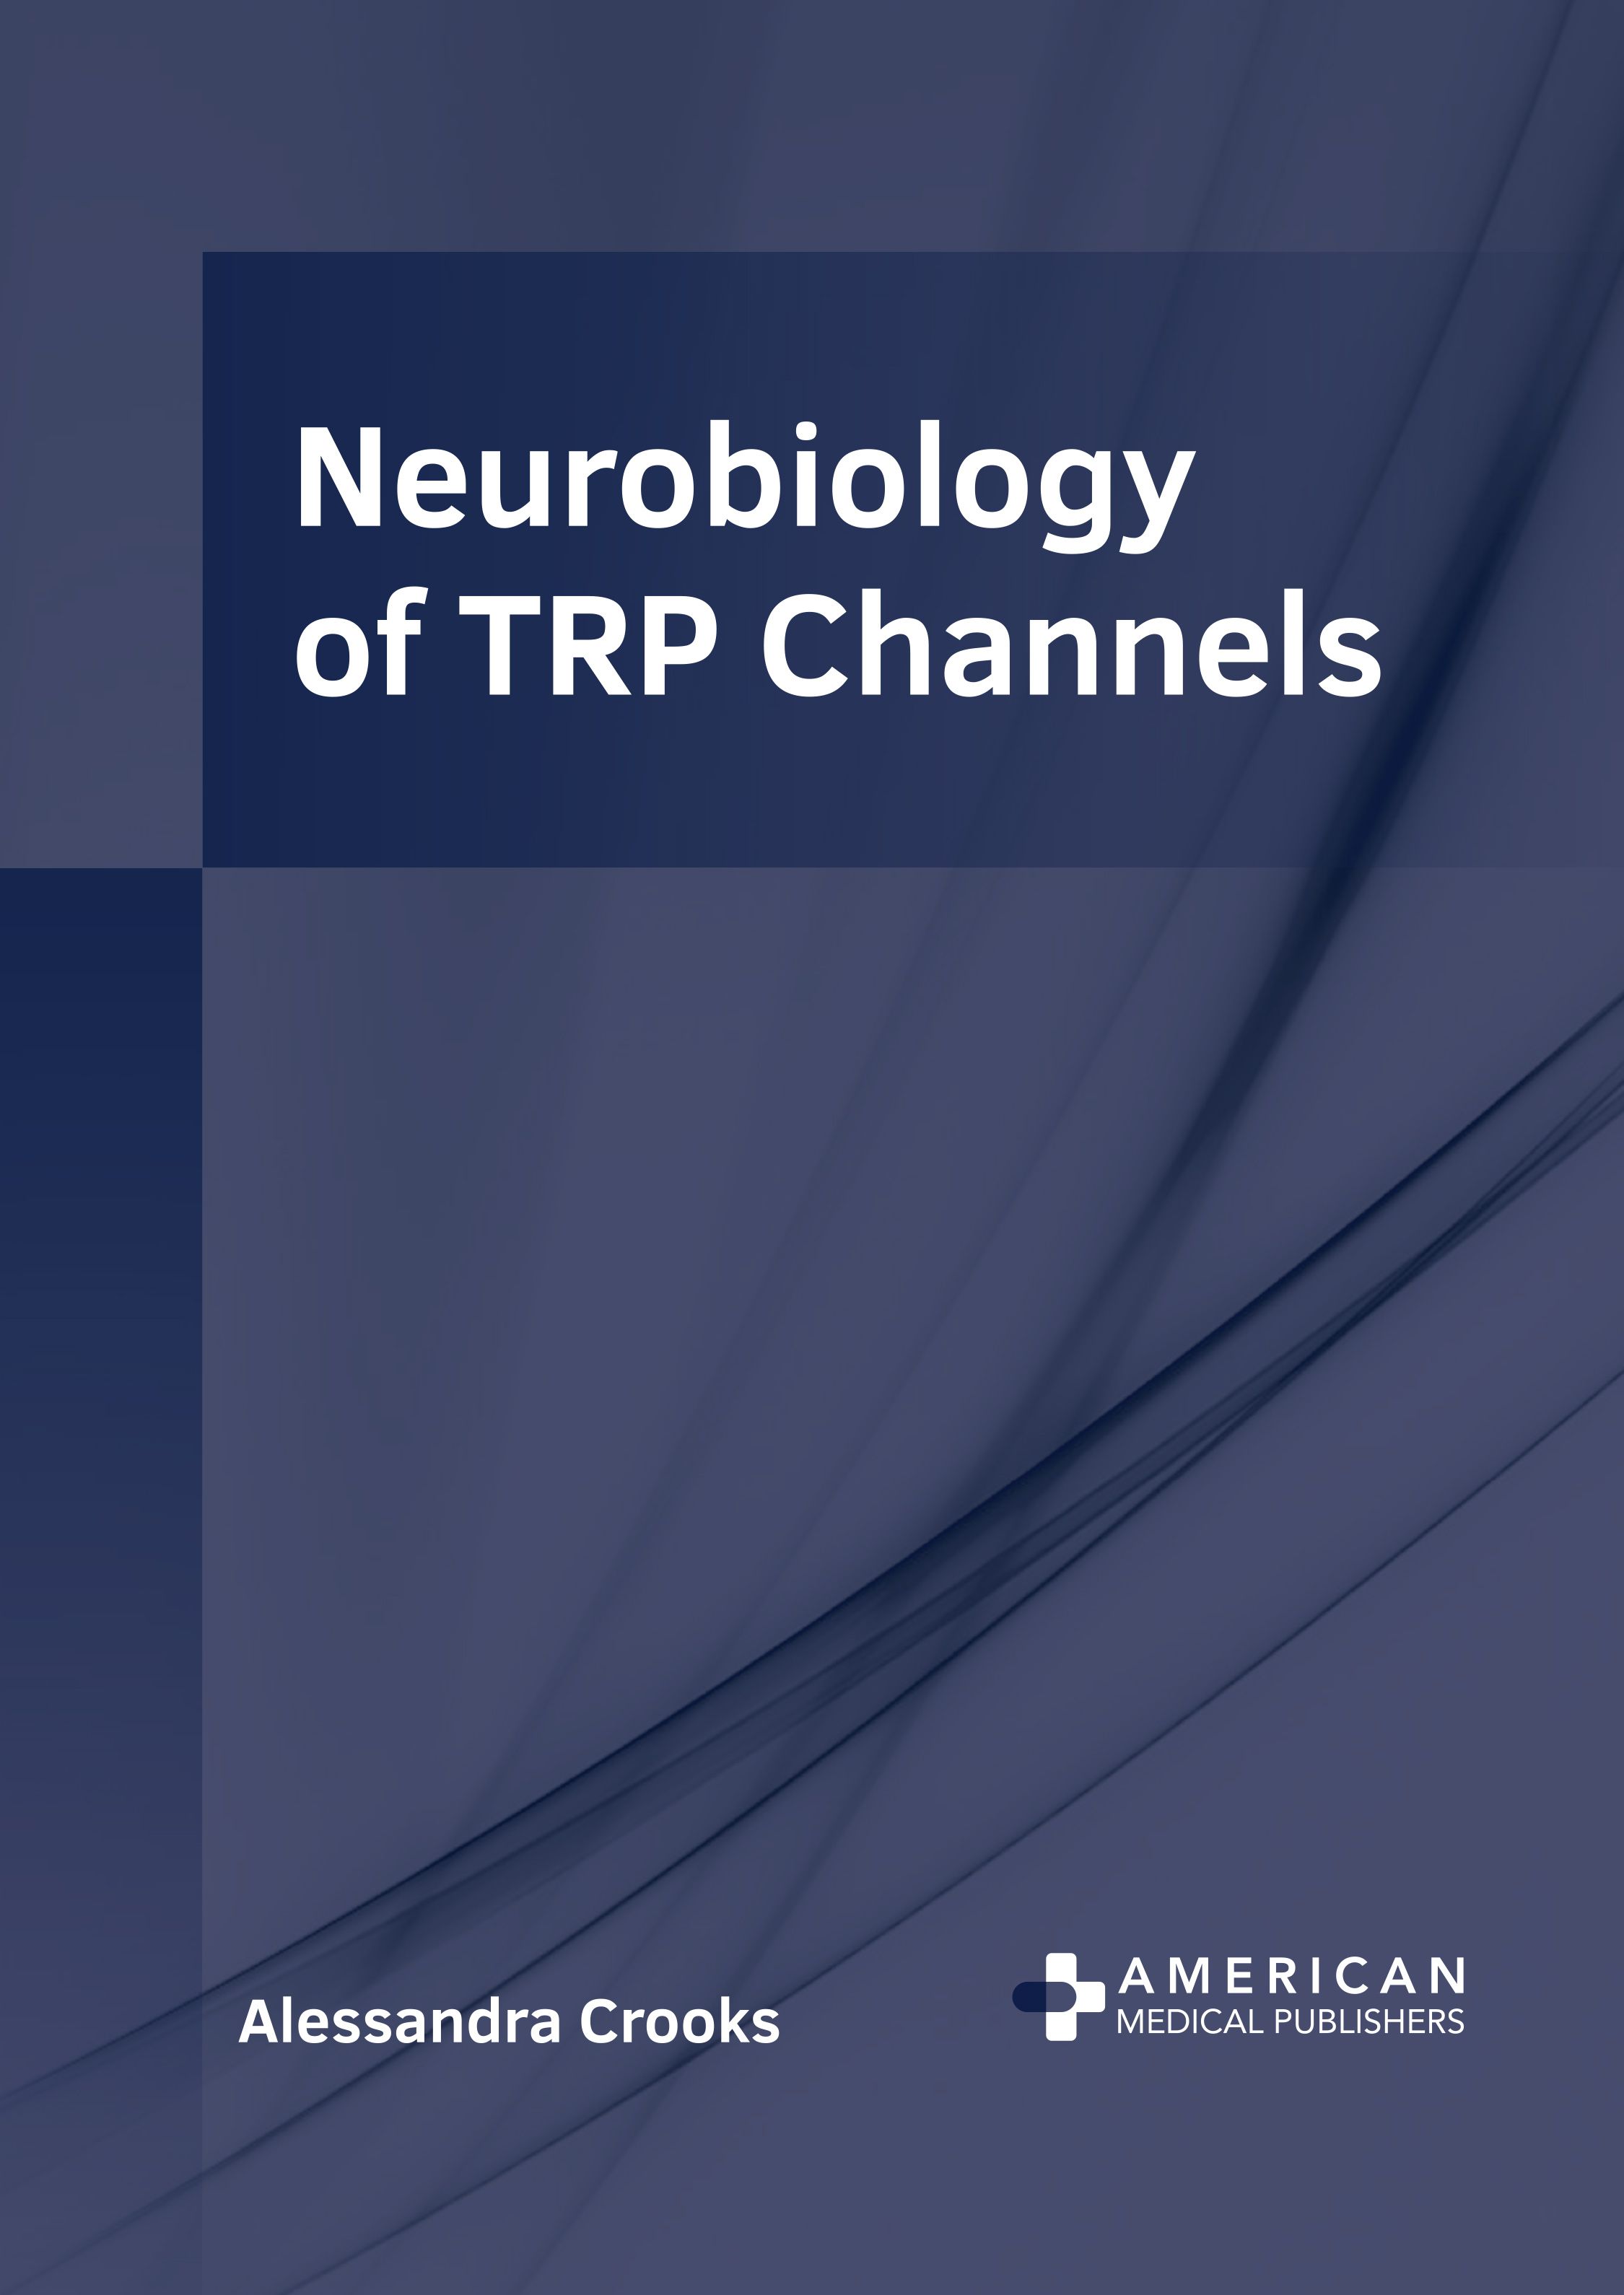 NEUROBIOLOGY OF TRP CHANNELS